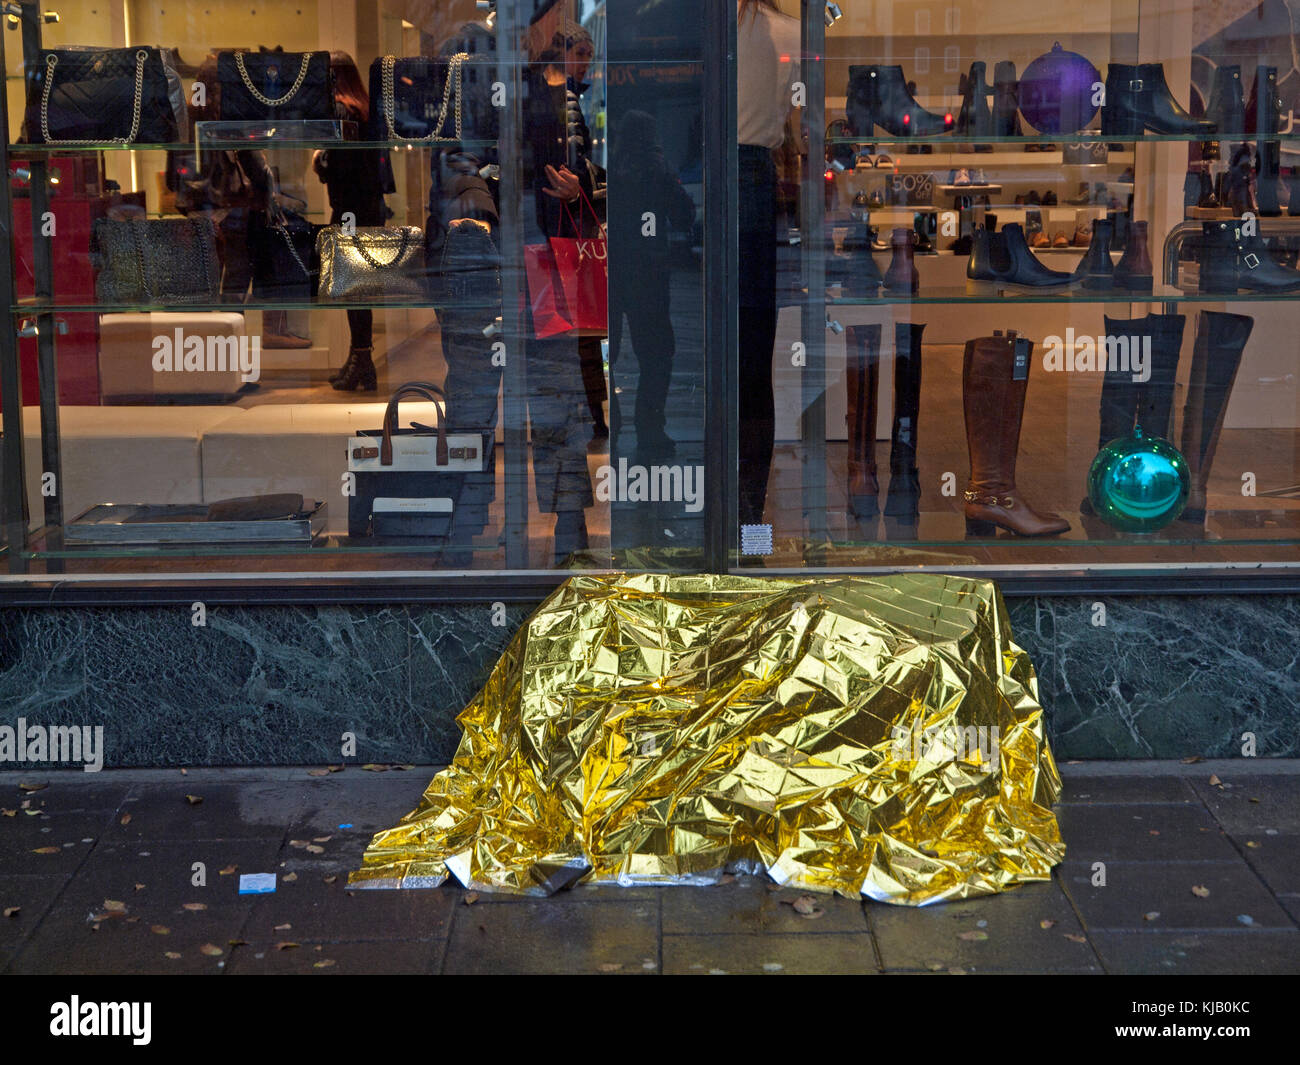 A homeless person's possessions hidden beneath gold wrapping paper on a Brighton street Stock Photo